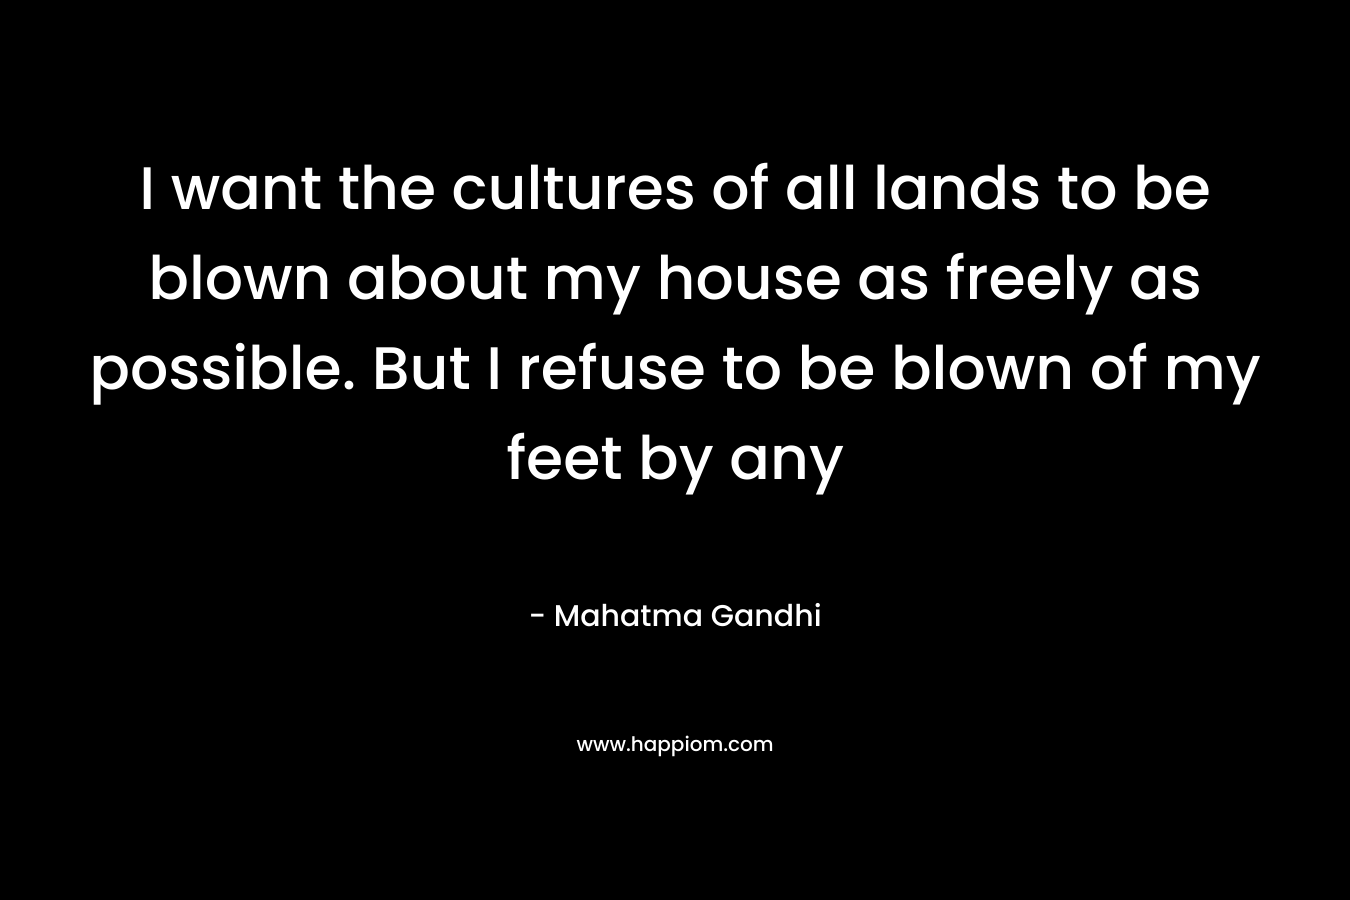 I want the cultures of all lands to be blown about my house as freely as possible. But I refuse to be blown of my feet by any – Mahatma Gandhi